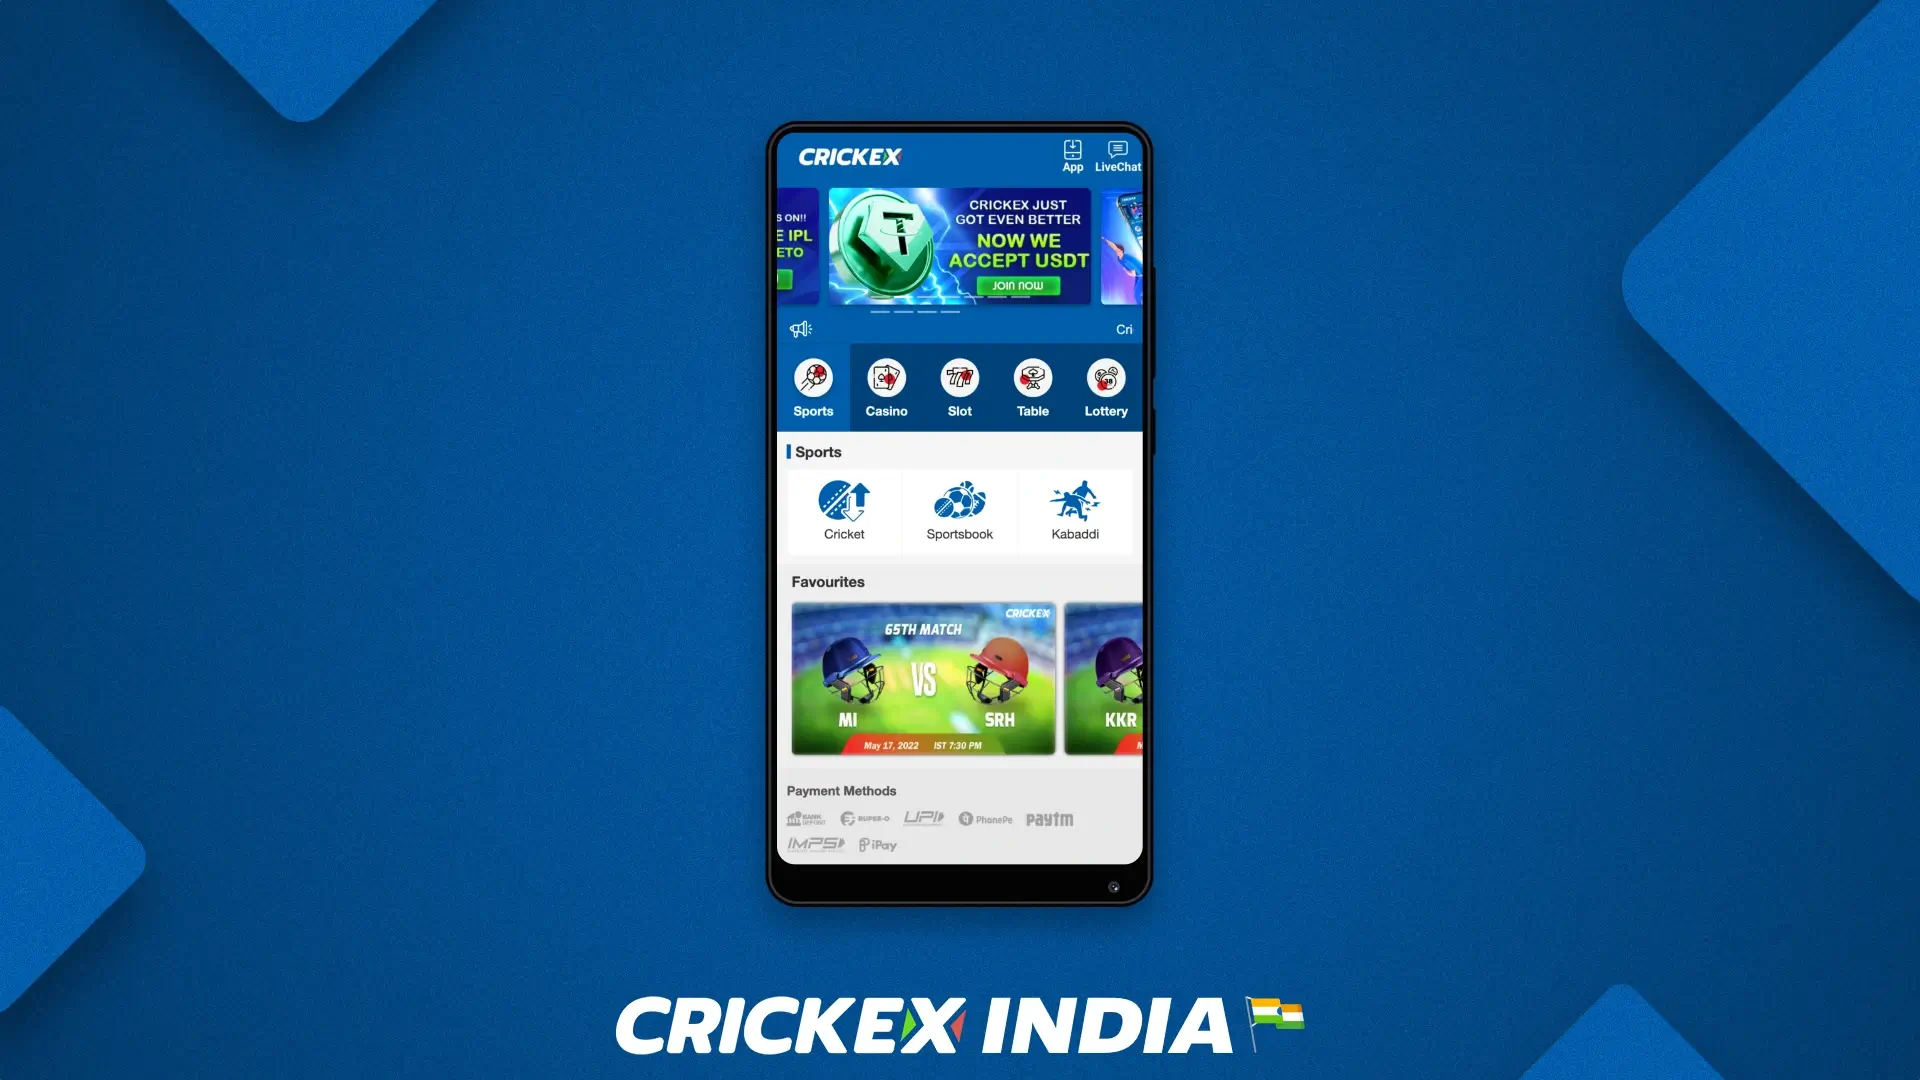 Home page of the mobile version of the Crickex website